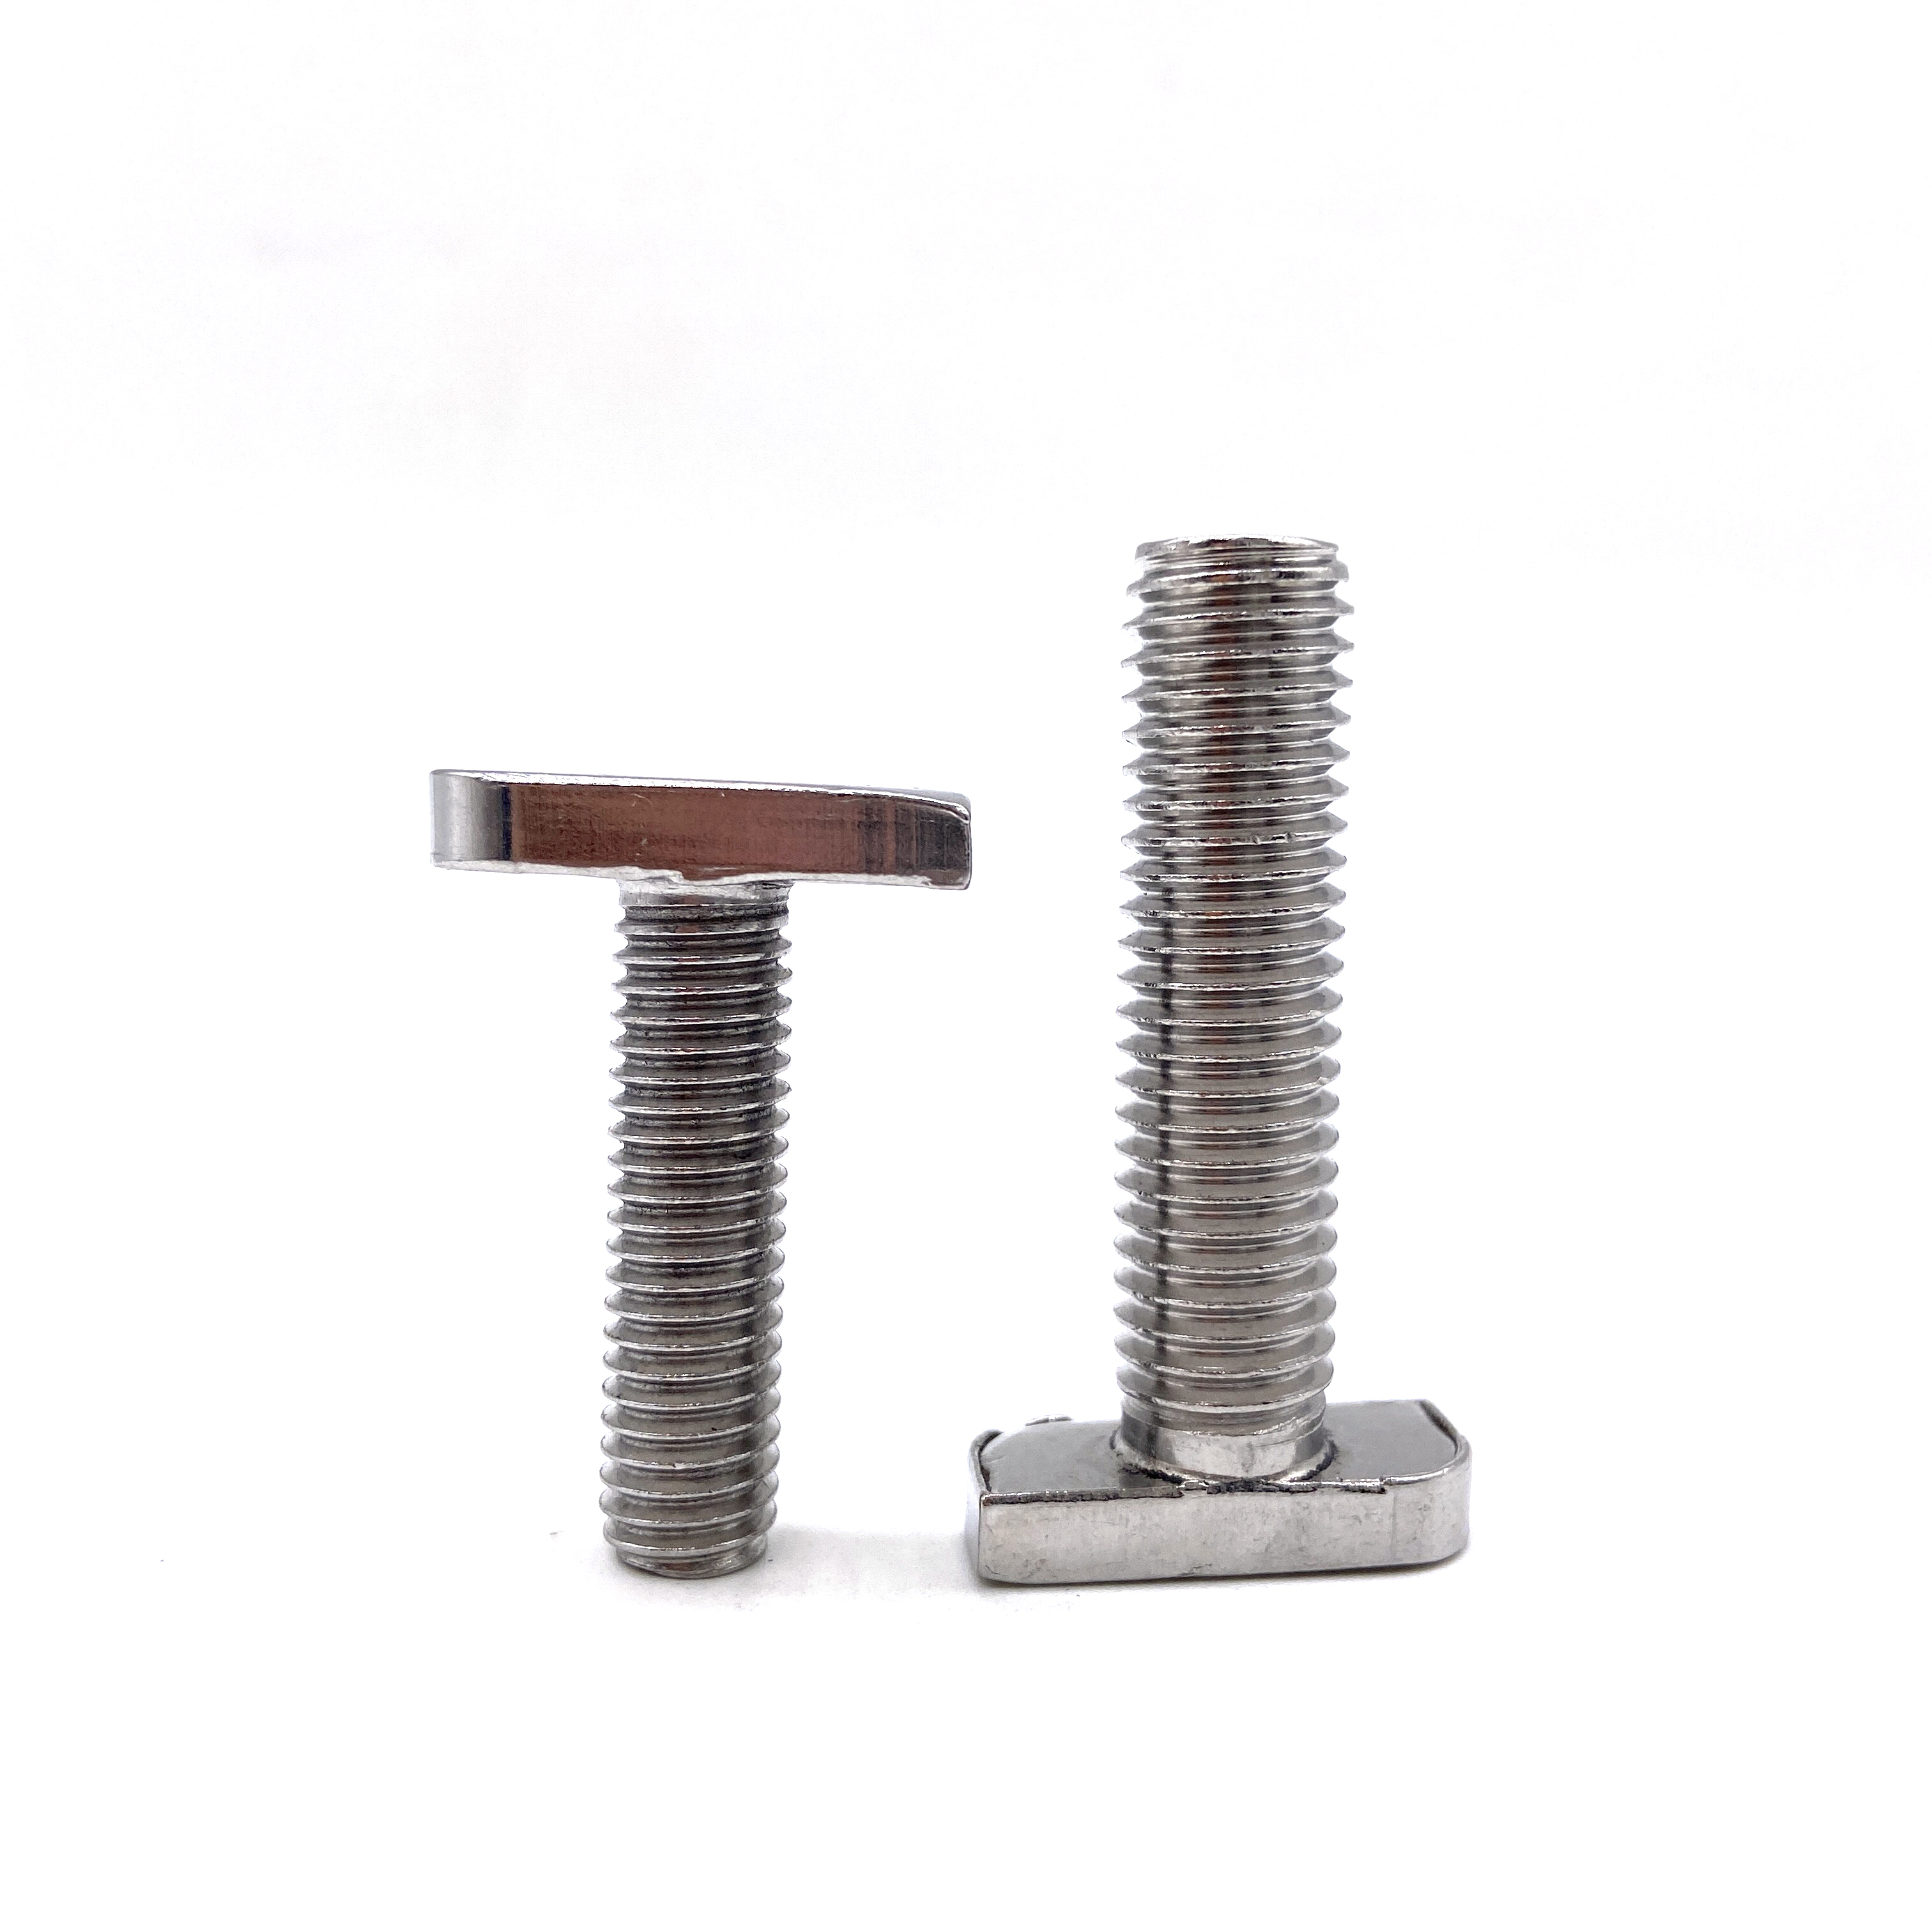 a2 stainless steel bolts